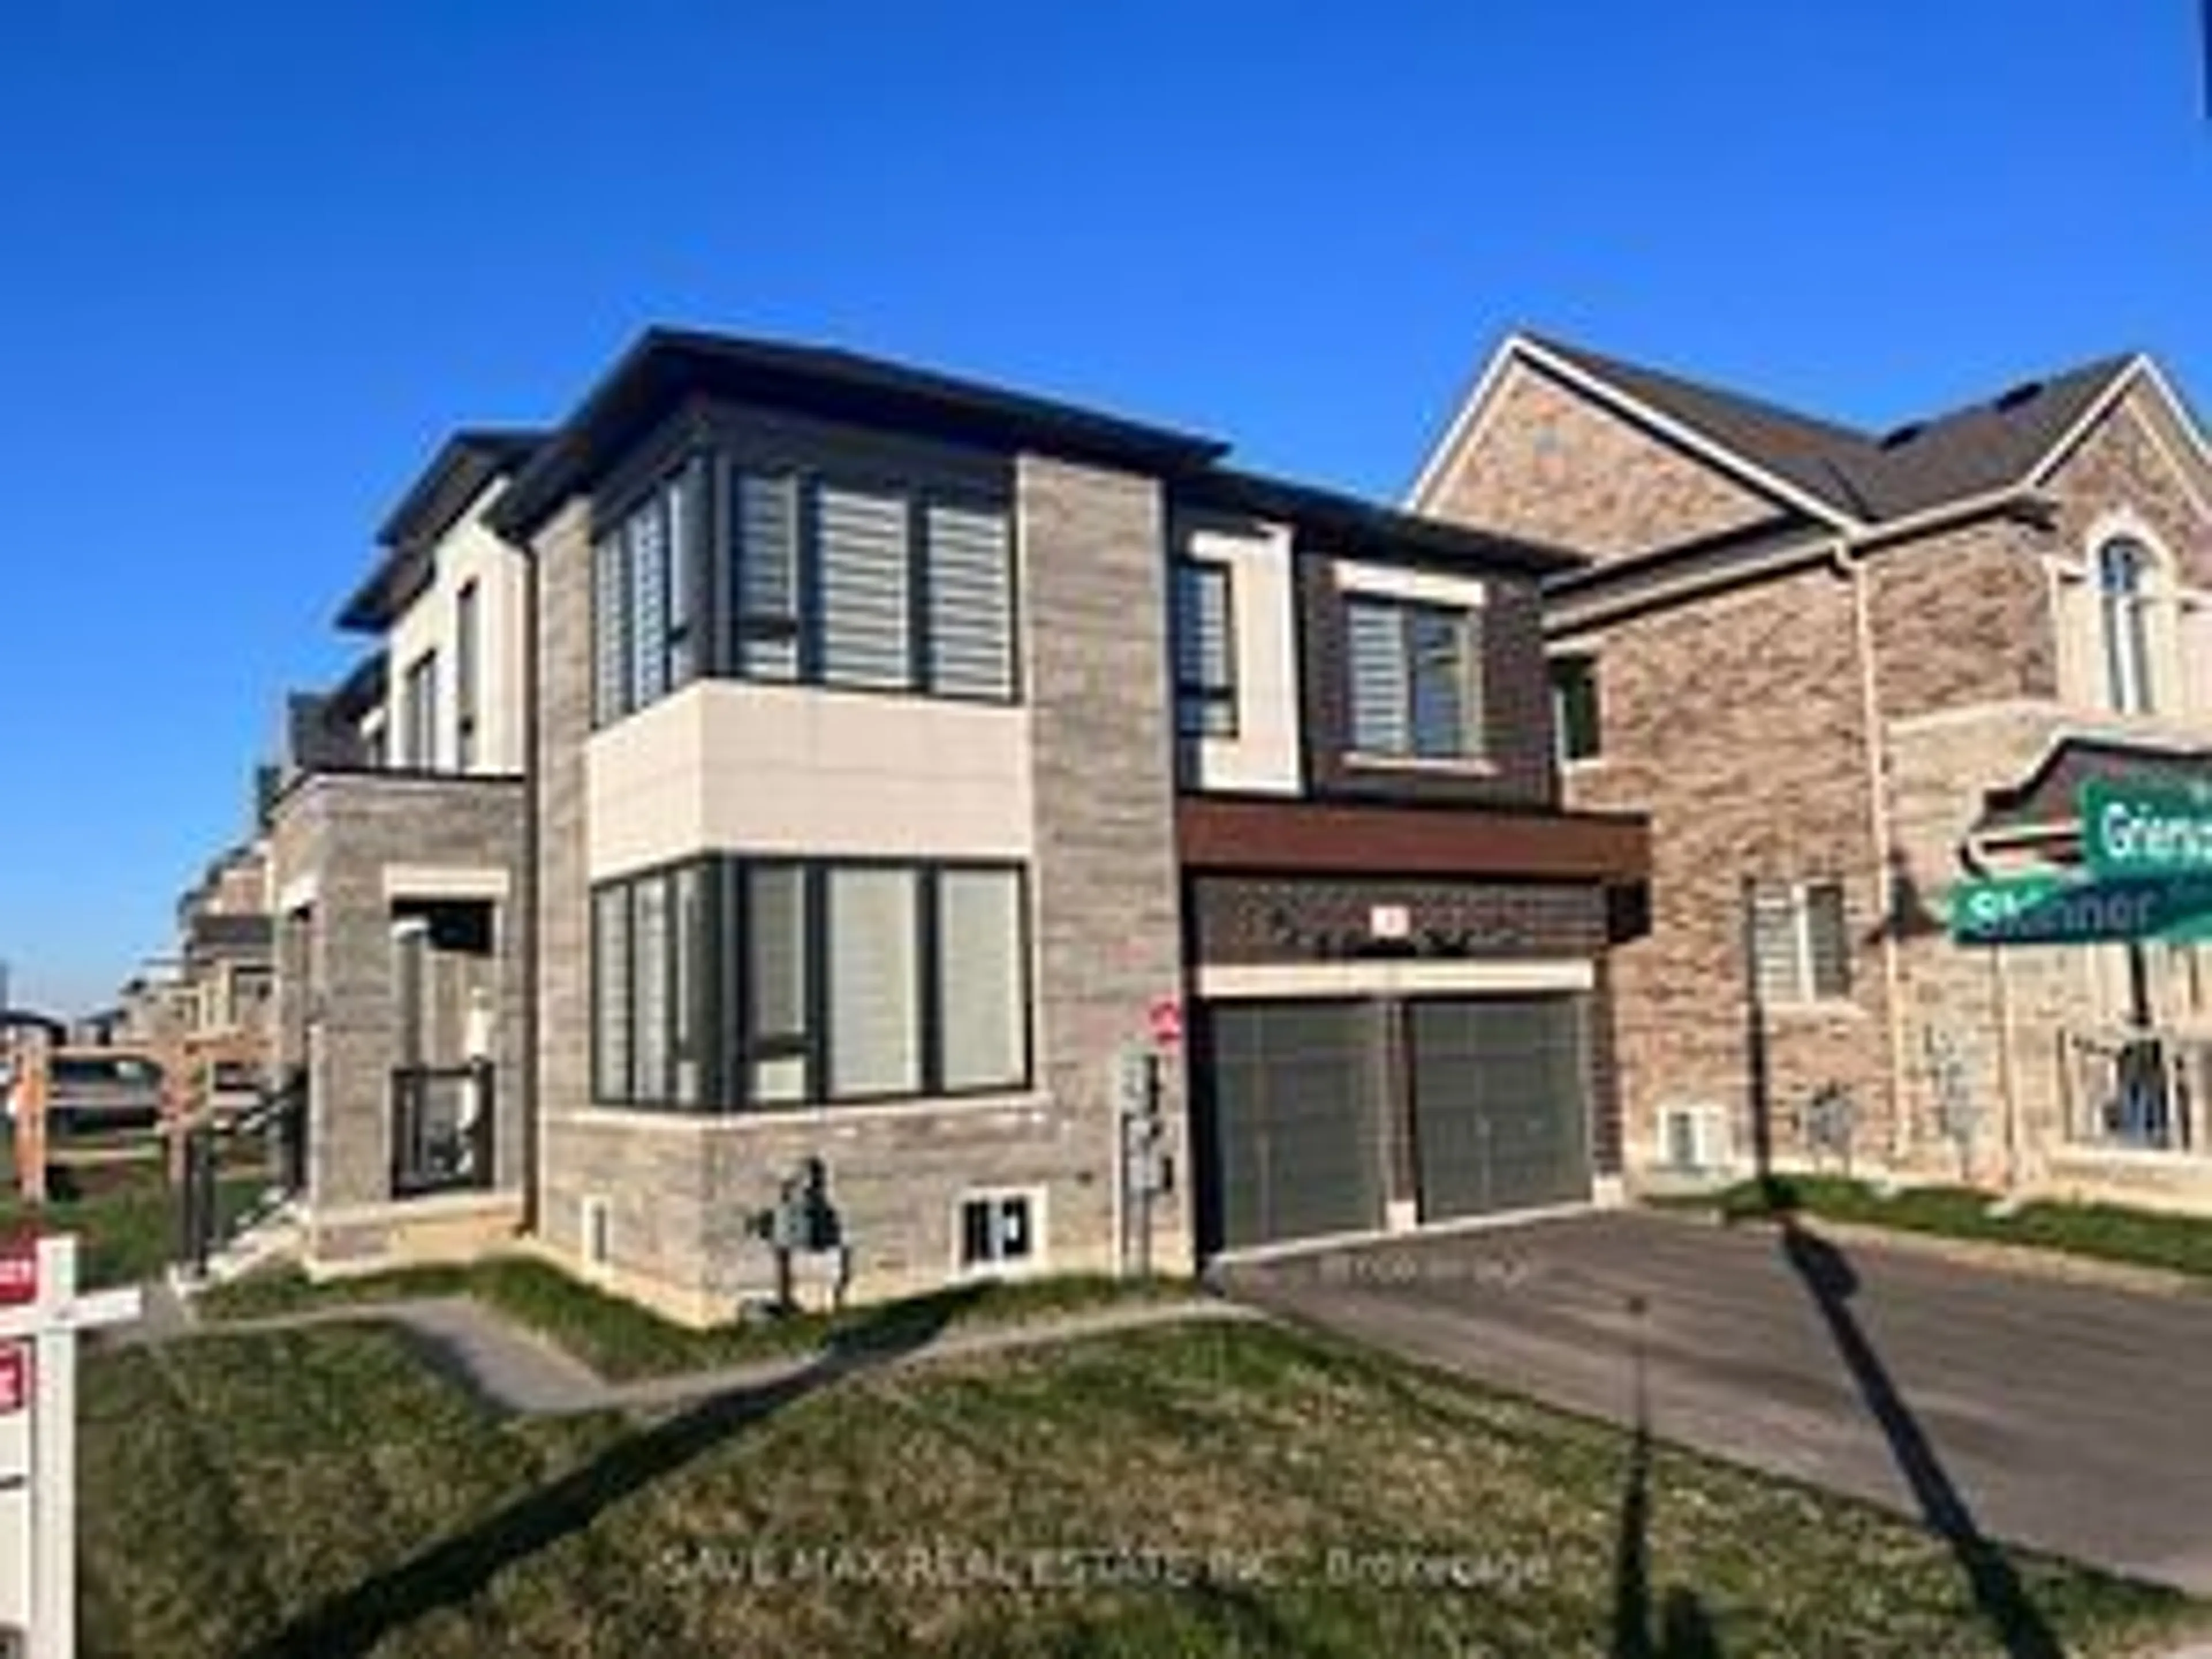 Home with brick exterior material for 3 Grierson Tr, Hamilton Ontario L8B 1Z7